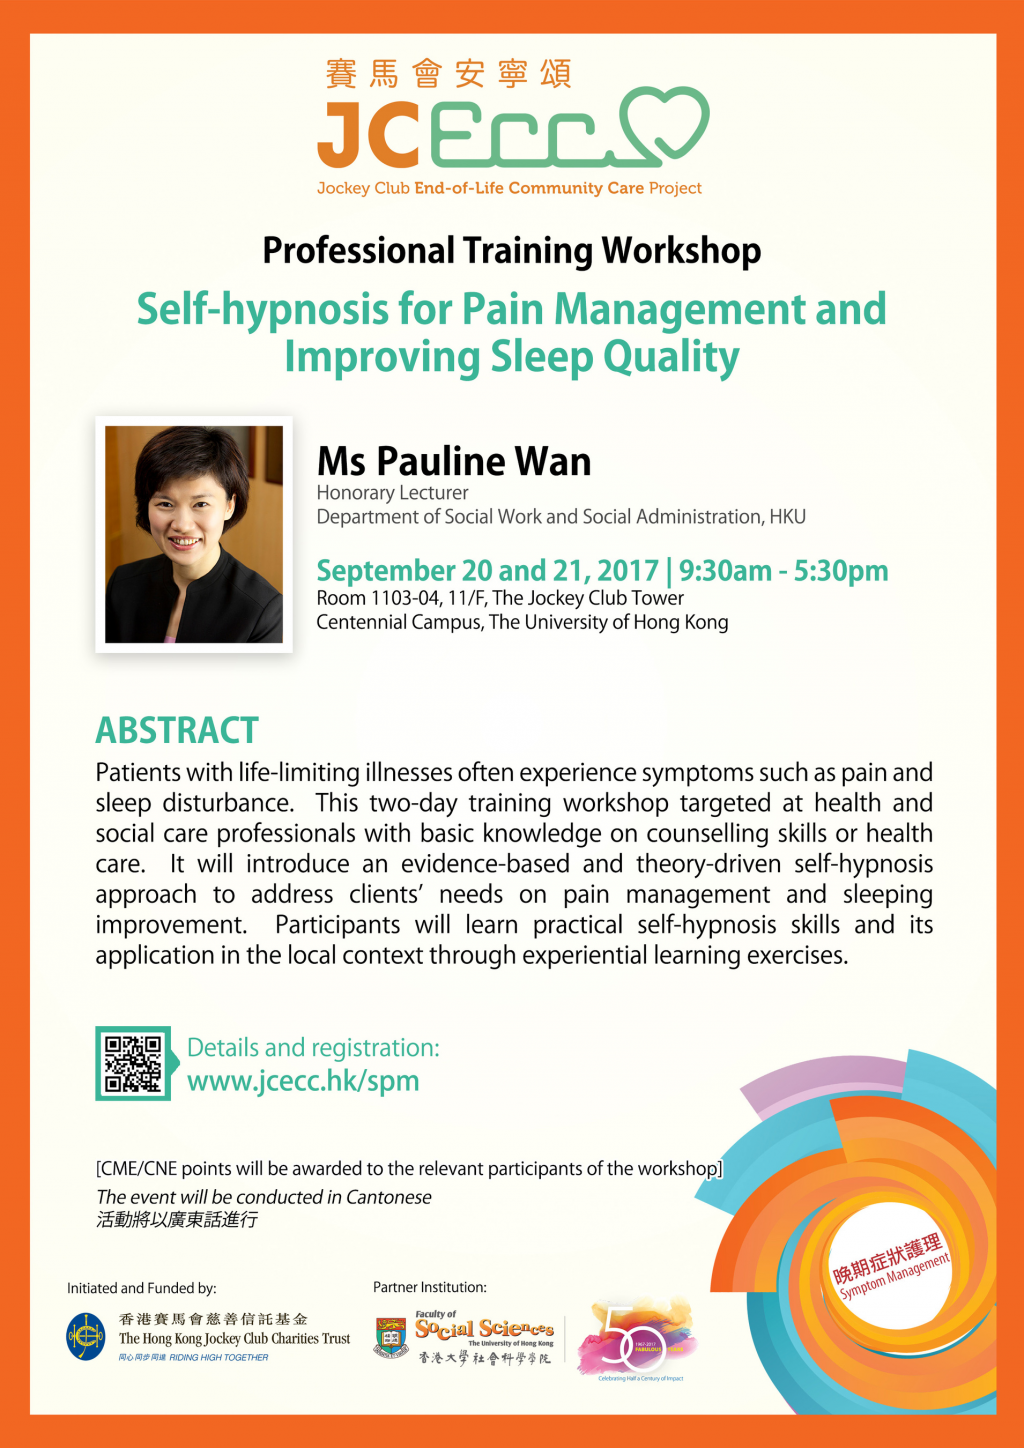 JCECC Workshop on Self-hypnosis for Pain Management and Improving Sleep Quality